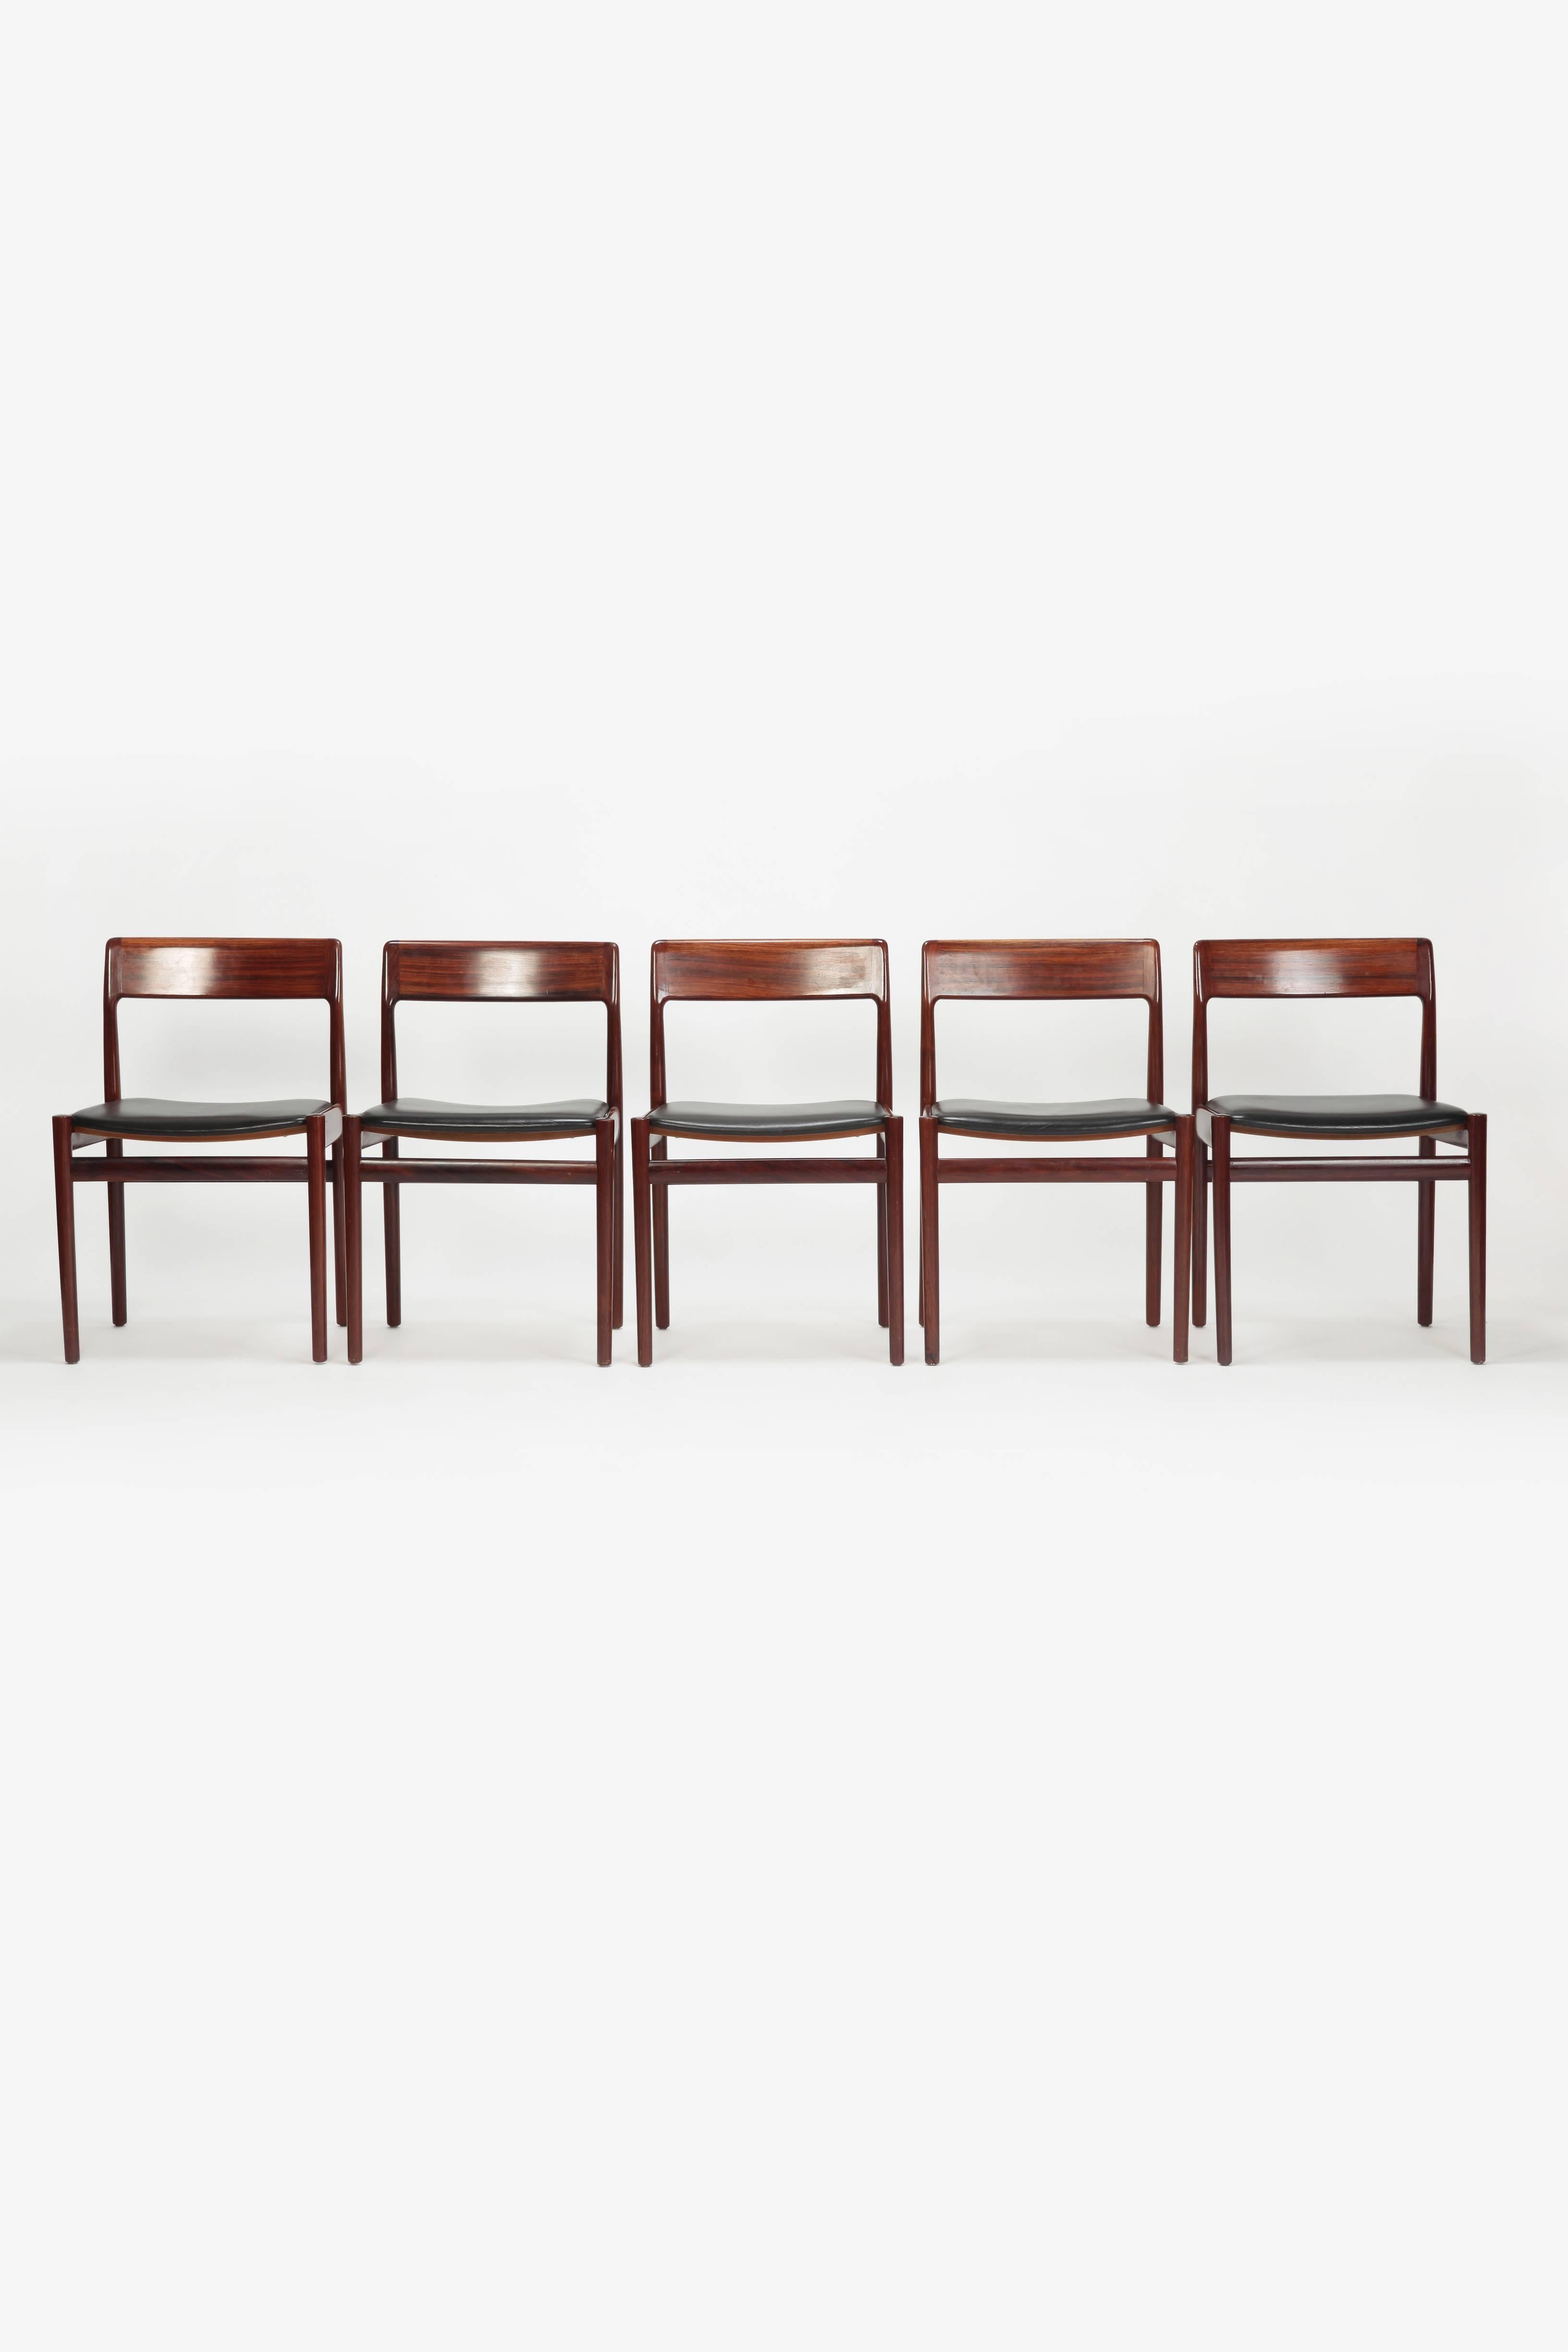 Five Johannes Norgaard chairs manufactured by Norgaards Moebelfabrik in the 1960s. Elegant, simple rosewood and black leather chairs.